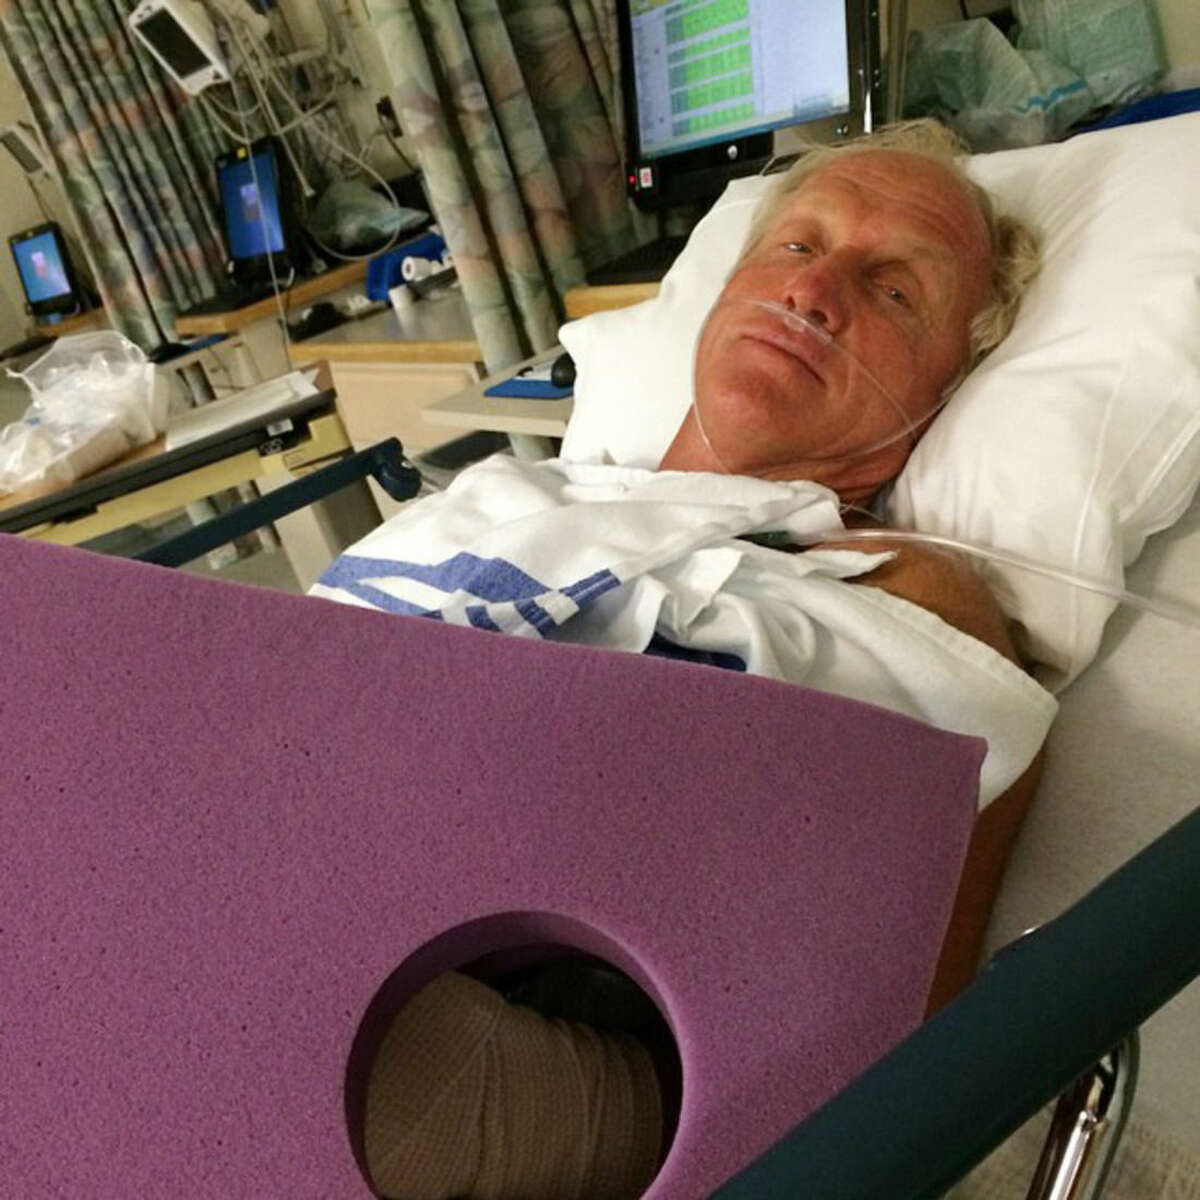 This photo provided by Greg Norman shows Norman resting in a hospital bed after a chainsaw accident. Norman posted a photo to Instagram on Sunday, Sept. 14, 2014, in which he was laying in a hospital bed with his left arm heavily bandaged. The Hall of Fame golfer and entrepreneur, was cutting back trees in his South Florida home when the weight of a branch pulled his left hand toward the chain saw. He said the blade hit him just below where a person would be wearing a wrist watch. He said doctors told him it missed his artery by a fraction of an inch. (AP Photo/Courtesy of Greg Norman) NO SALES